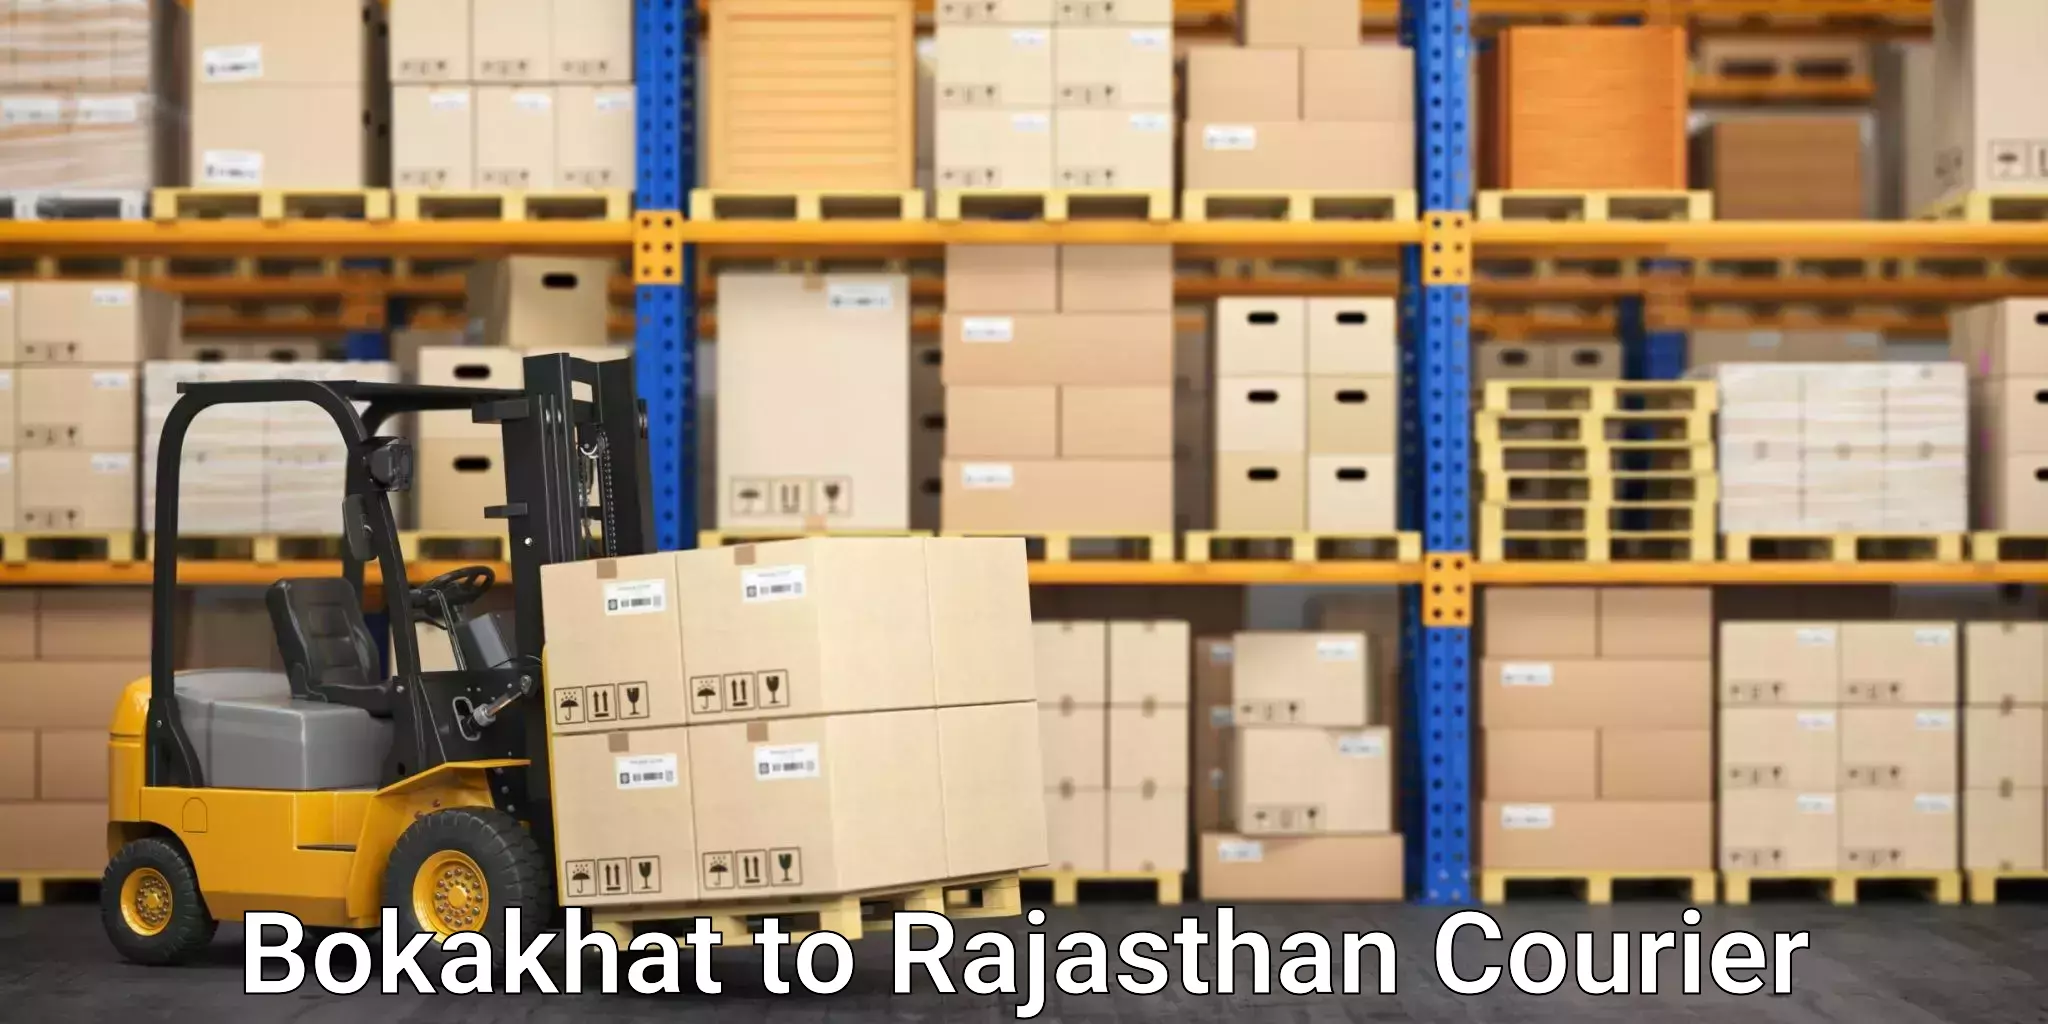 Round-the-clock parcel delivery Bokakhat to Pratapgarh Rajasthan